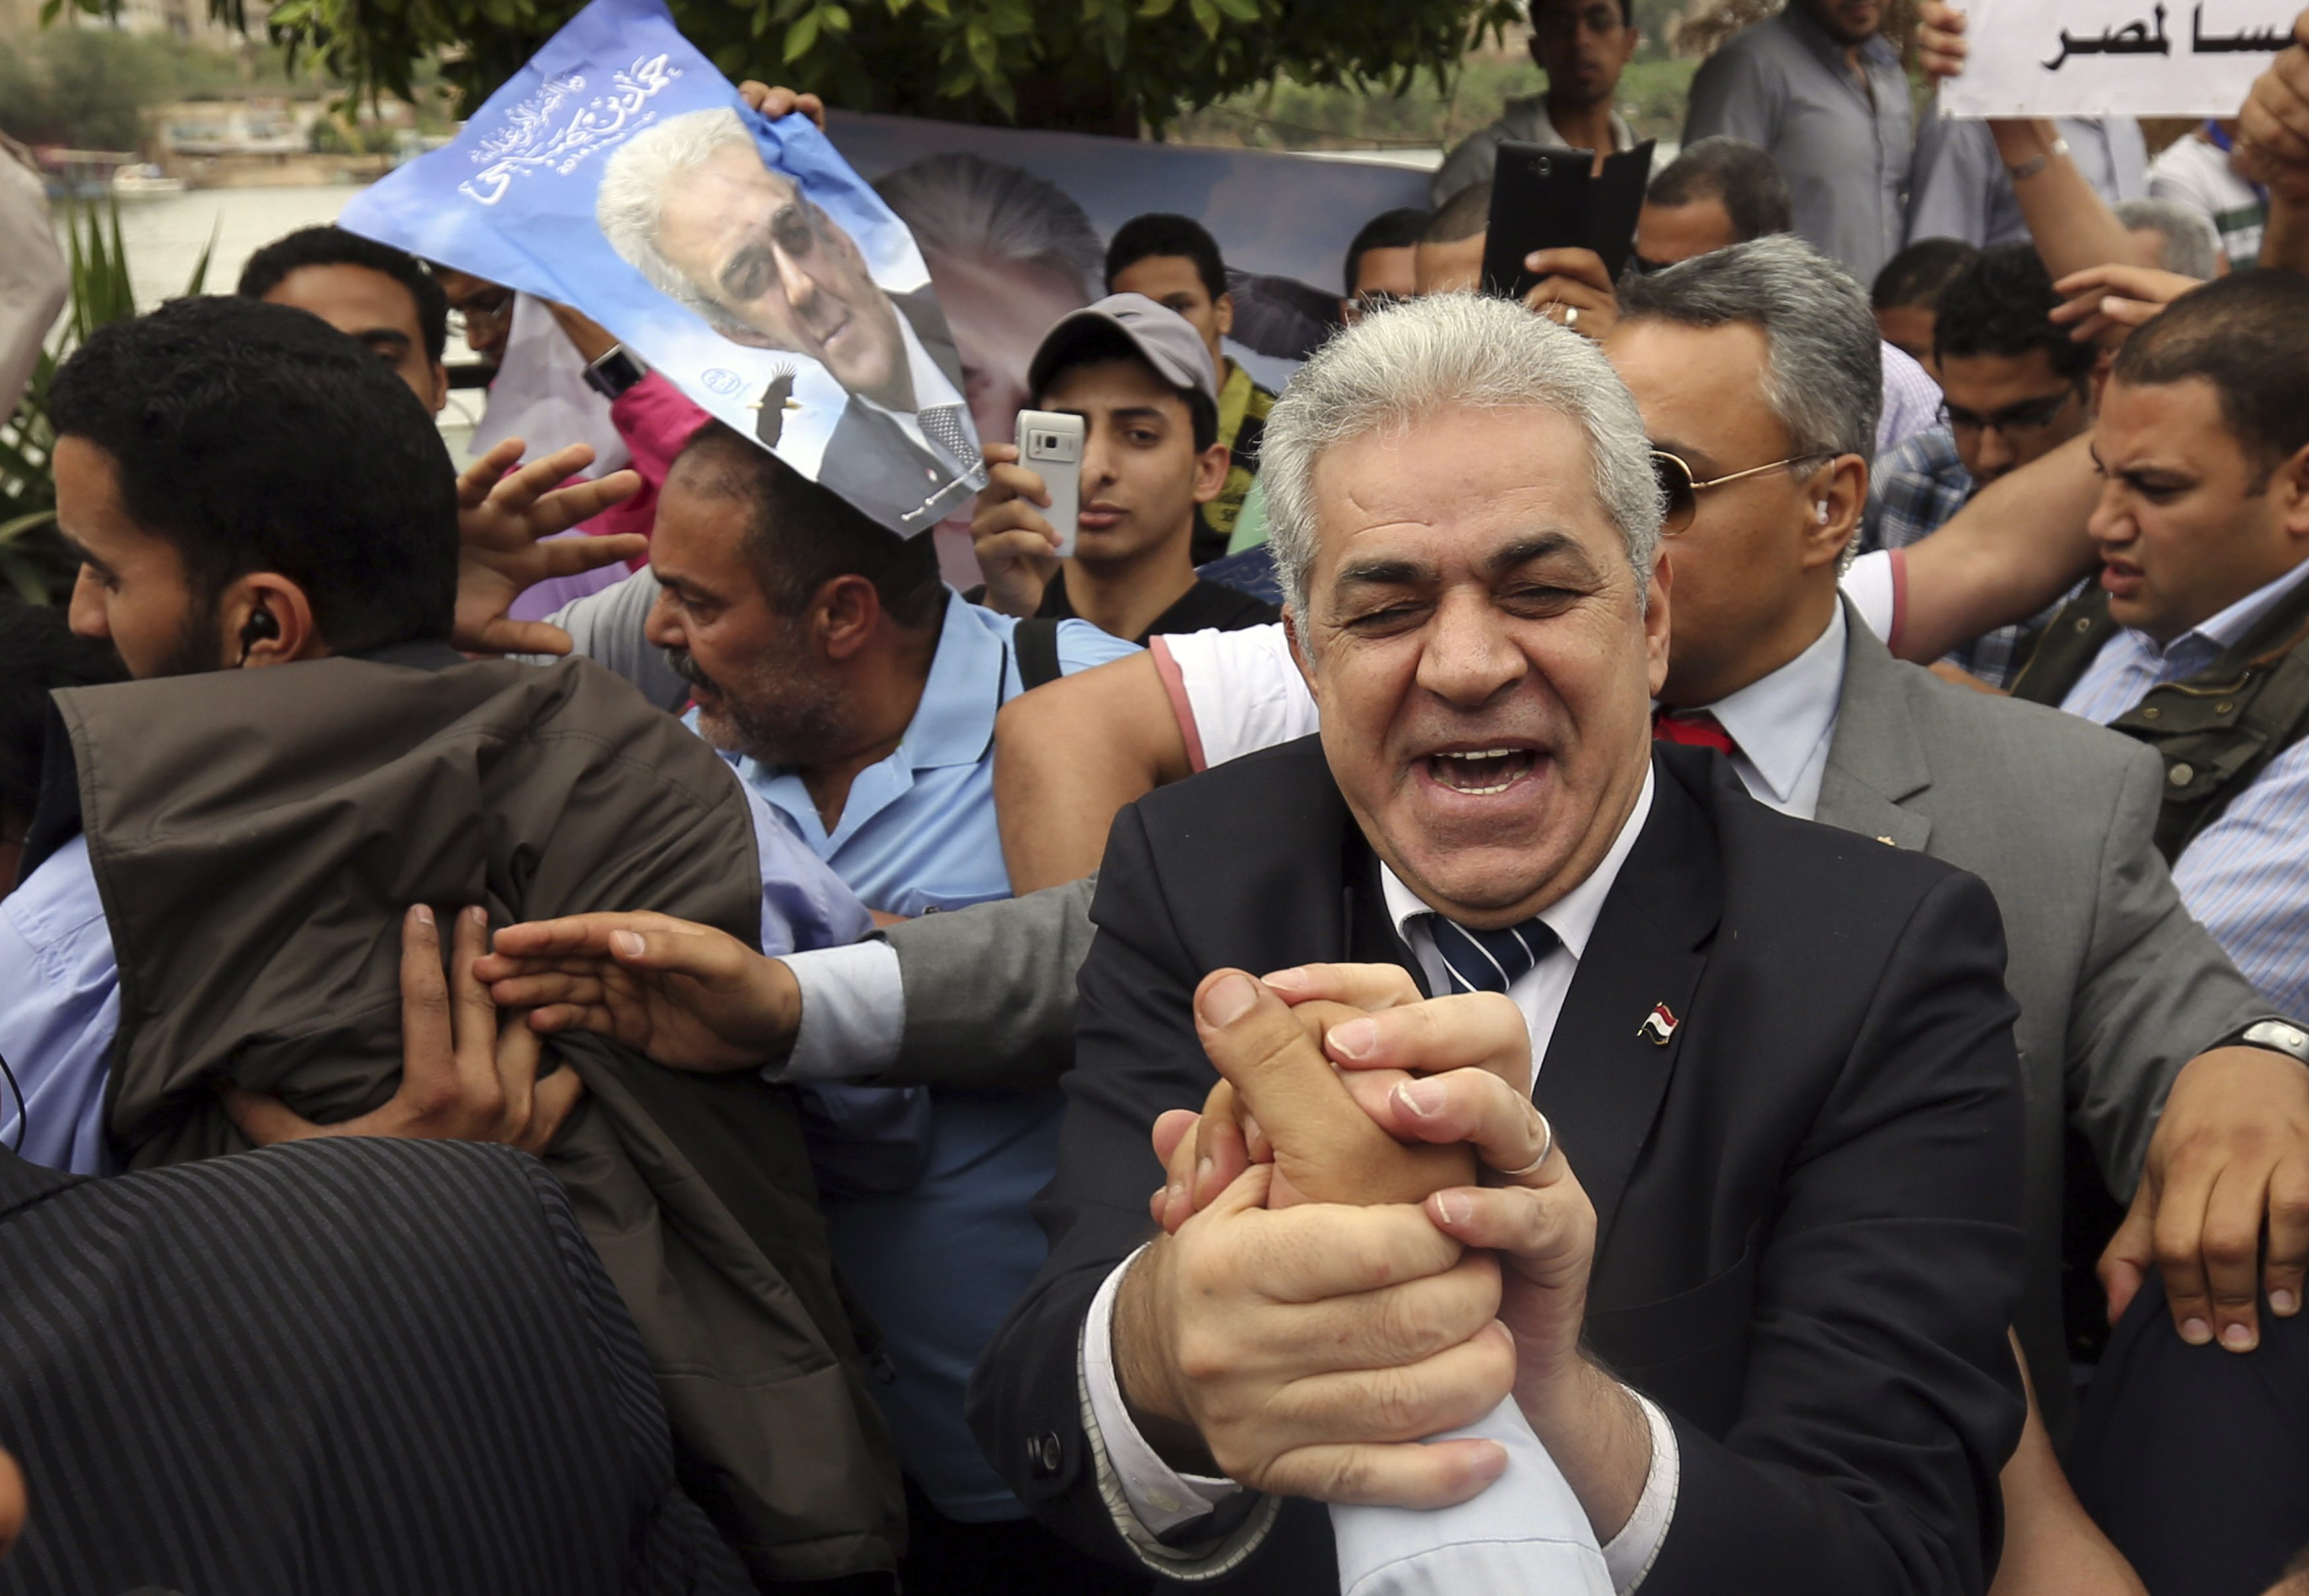 Egypt's leftist presidential candidate Hamdeen Sabahi shakes hands with supporters before a rally in Banha, northwest of Cairo May 7, 2014. Egyptians will vote in presidential elections on May 26 and 27.  REUTERS/Mohamed Abd El Ghany (EGYPT - Tags: POLITI